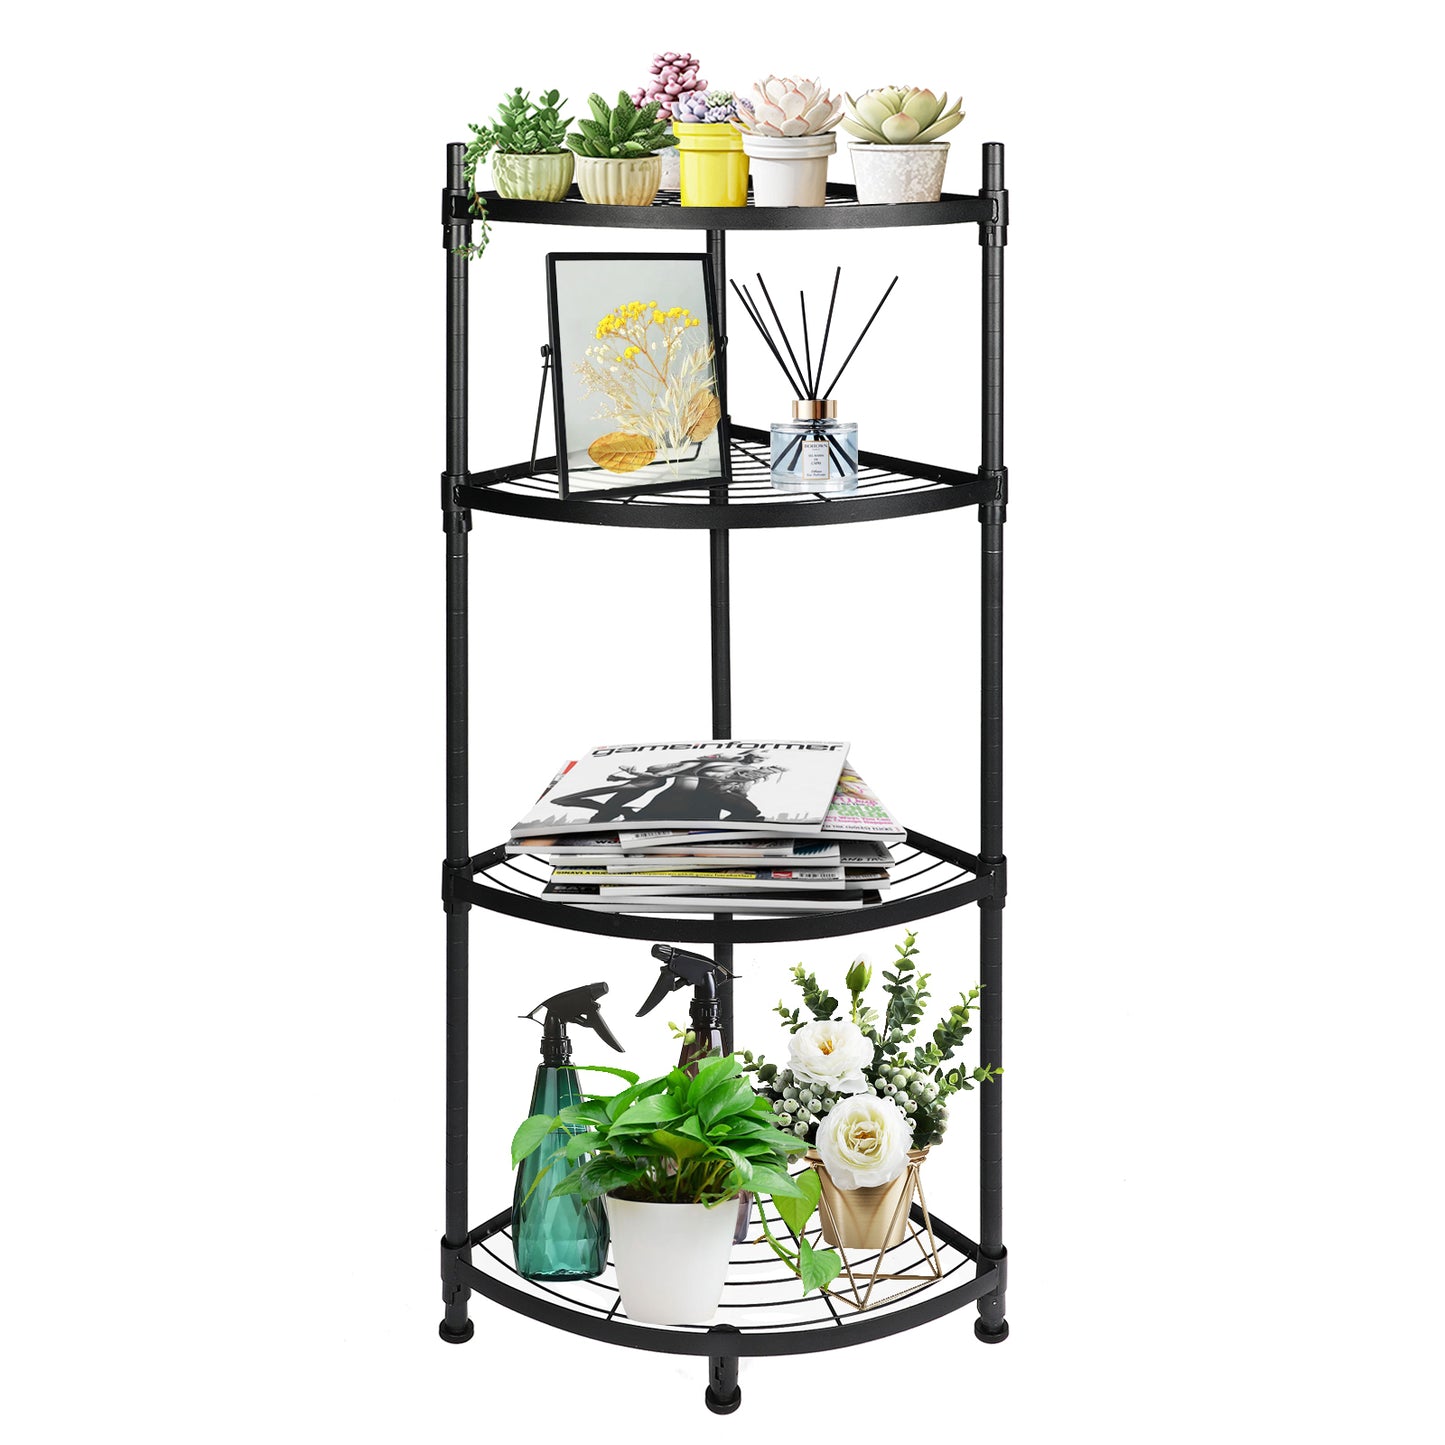 YSSOA 4 Tier Corner Display Rack Multipurpose Metal Shelving Unit, Bookcase Storage Rack Plant Stand for Living Room, Home Office, Kitchen, Small Space, 1-Pack, Black